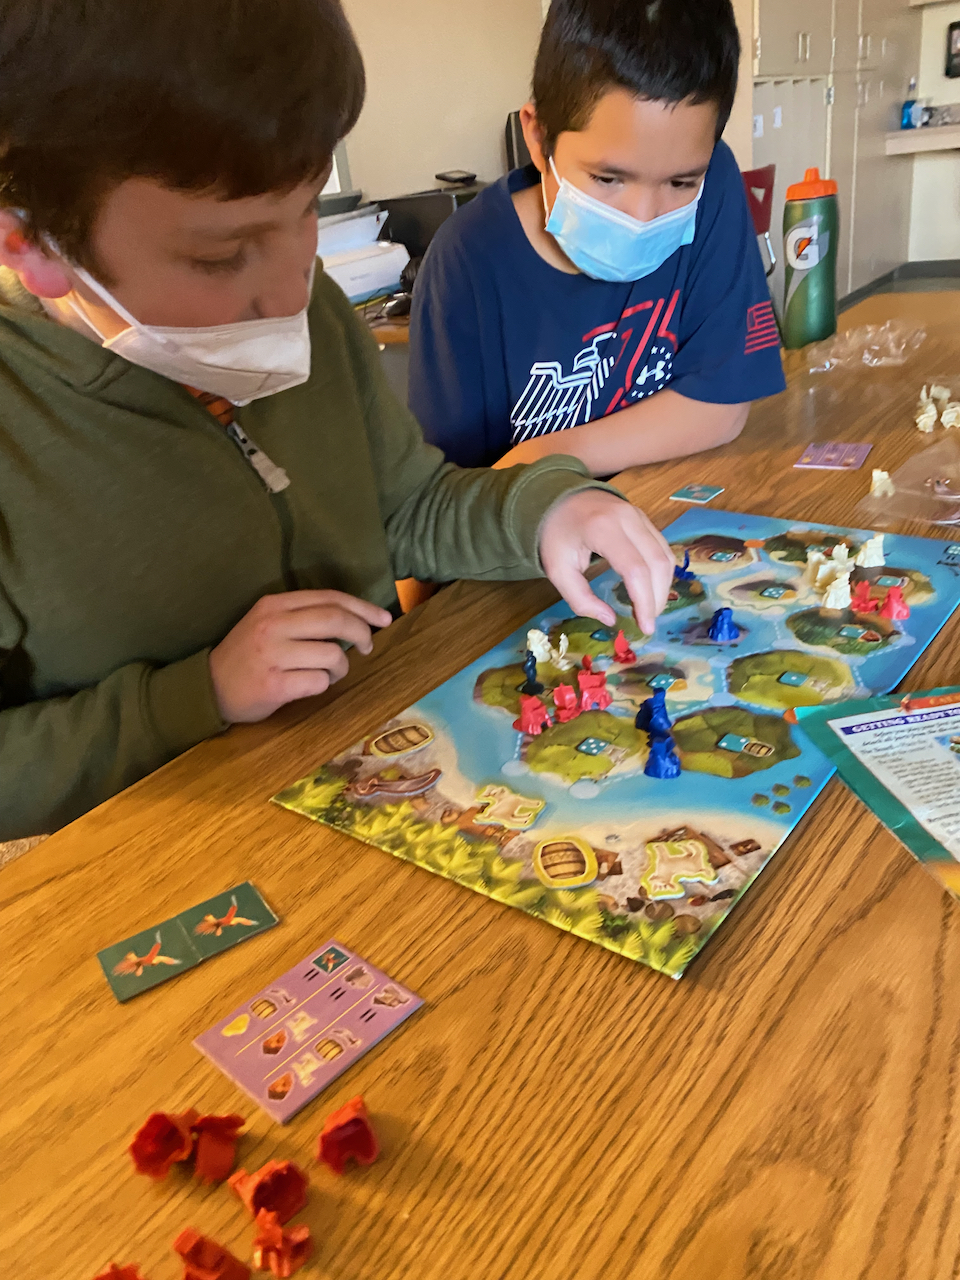 Playing With Purpose: Using Games to Enrich Learning & Engage